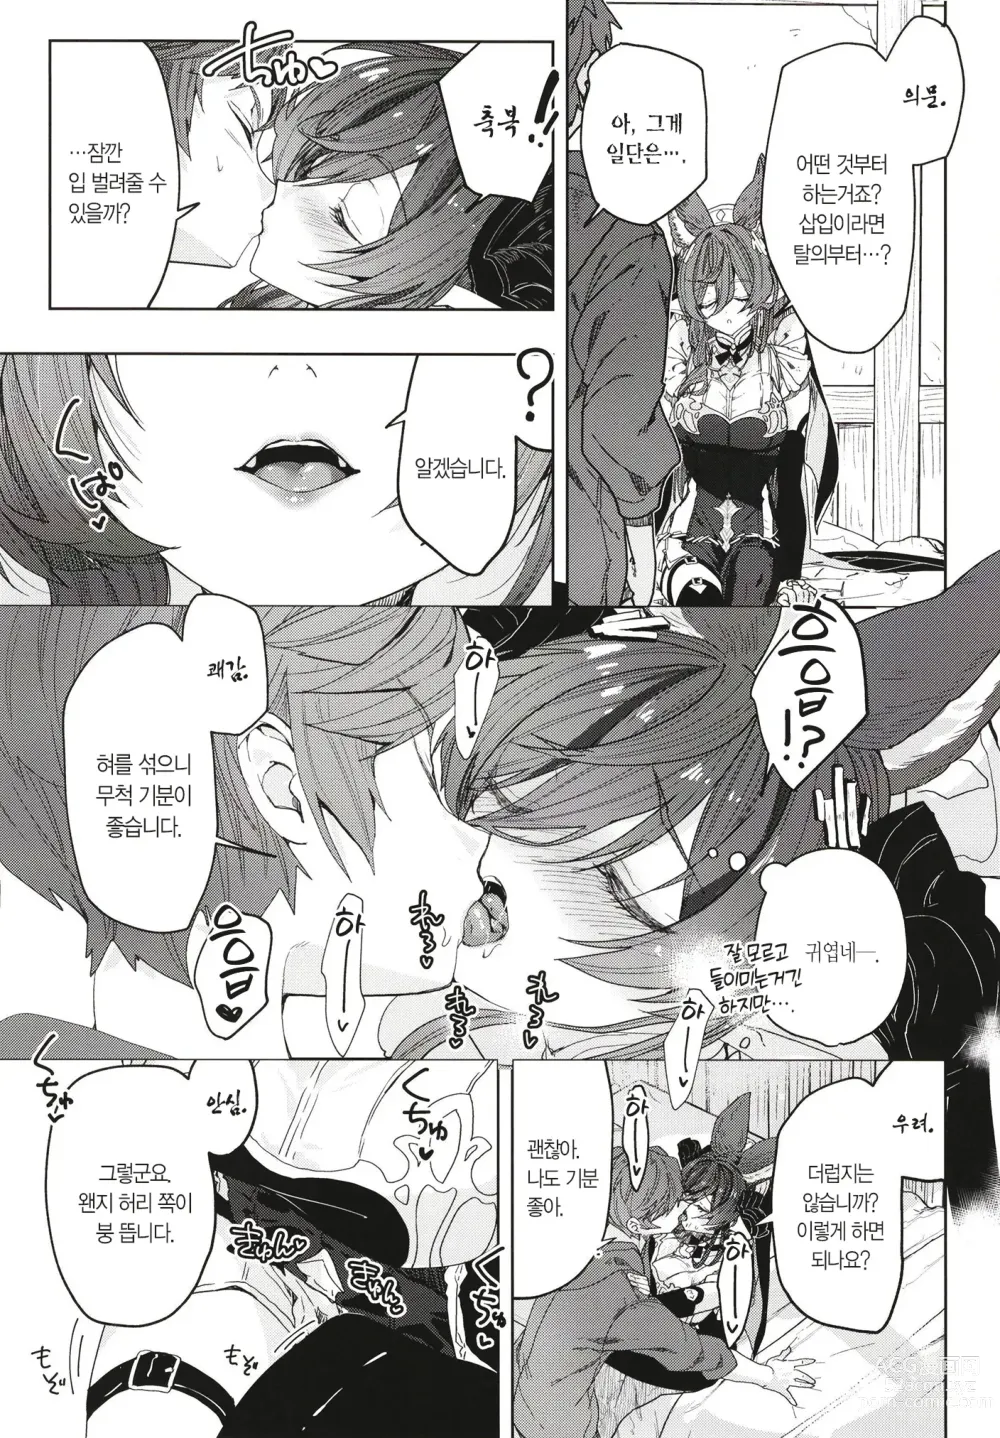 Page 9 of doujinshi 『금』의 축복